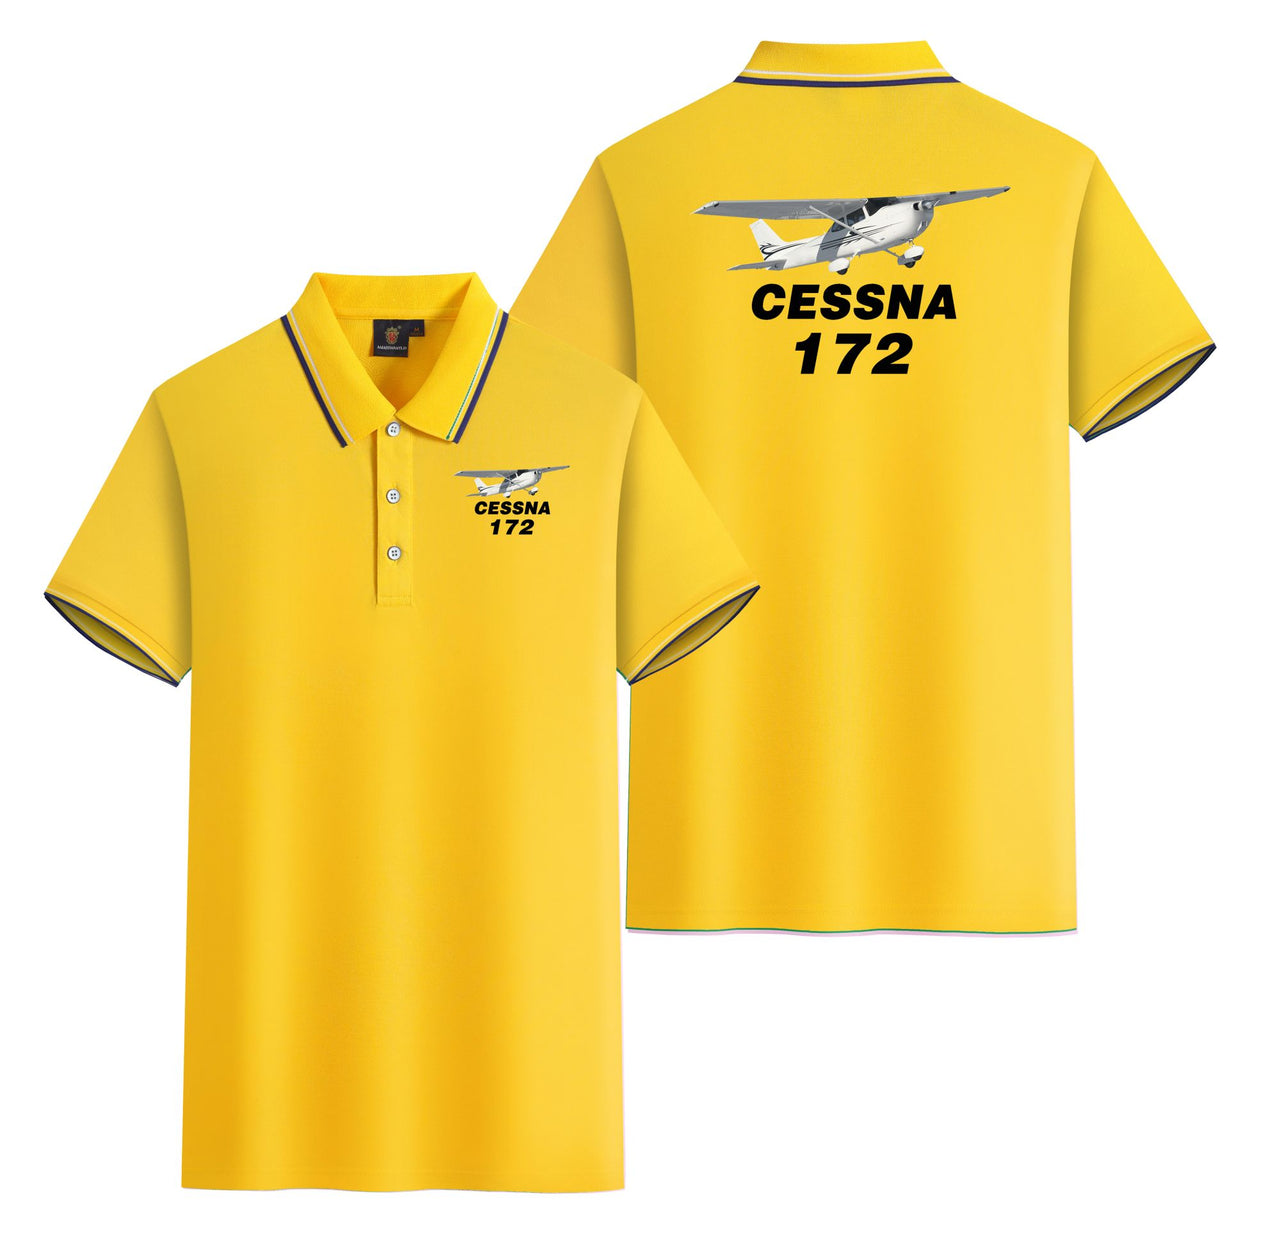 The Cessna 172 Designed Stylish Polo T-Shirts (Double-Side)